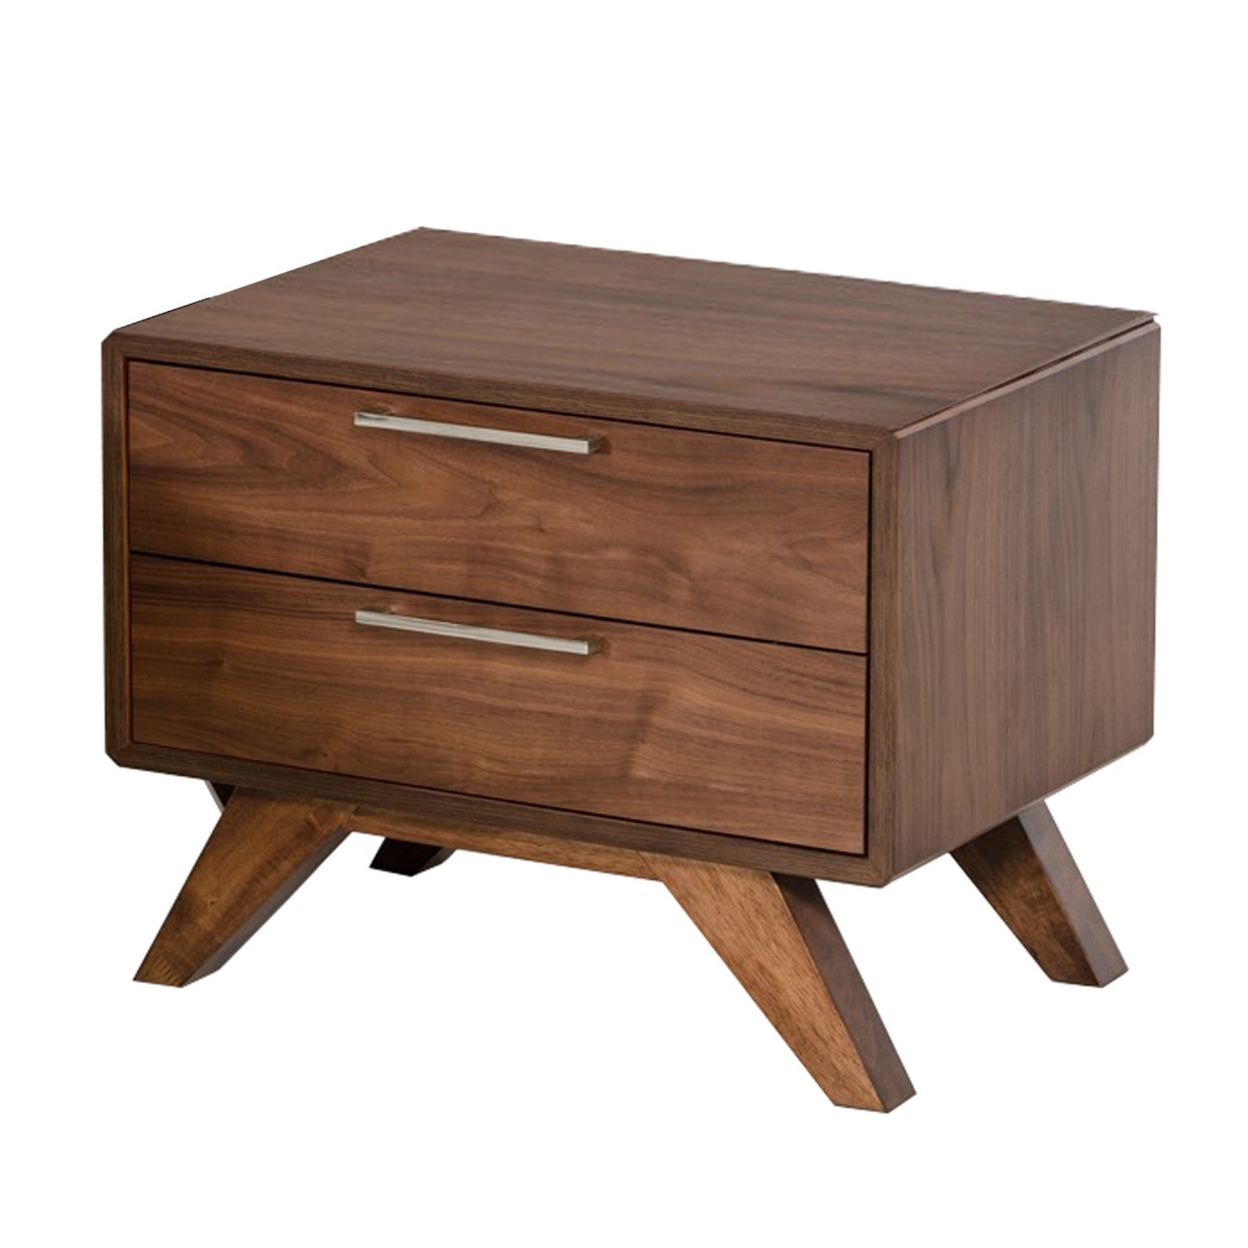 2 Drawer Wooden Nightstand With Metal Bar Handles And Angled Legs, Brown- Saltoro Sherpi